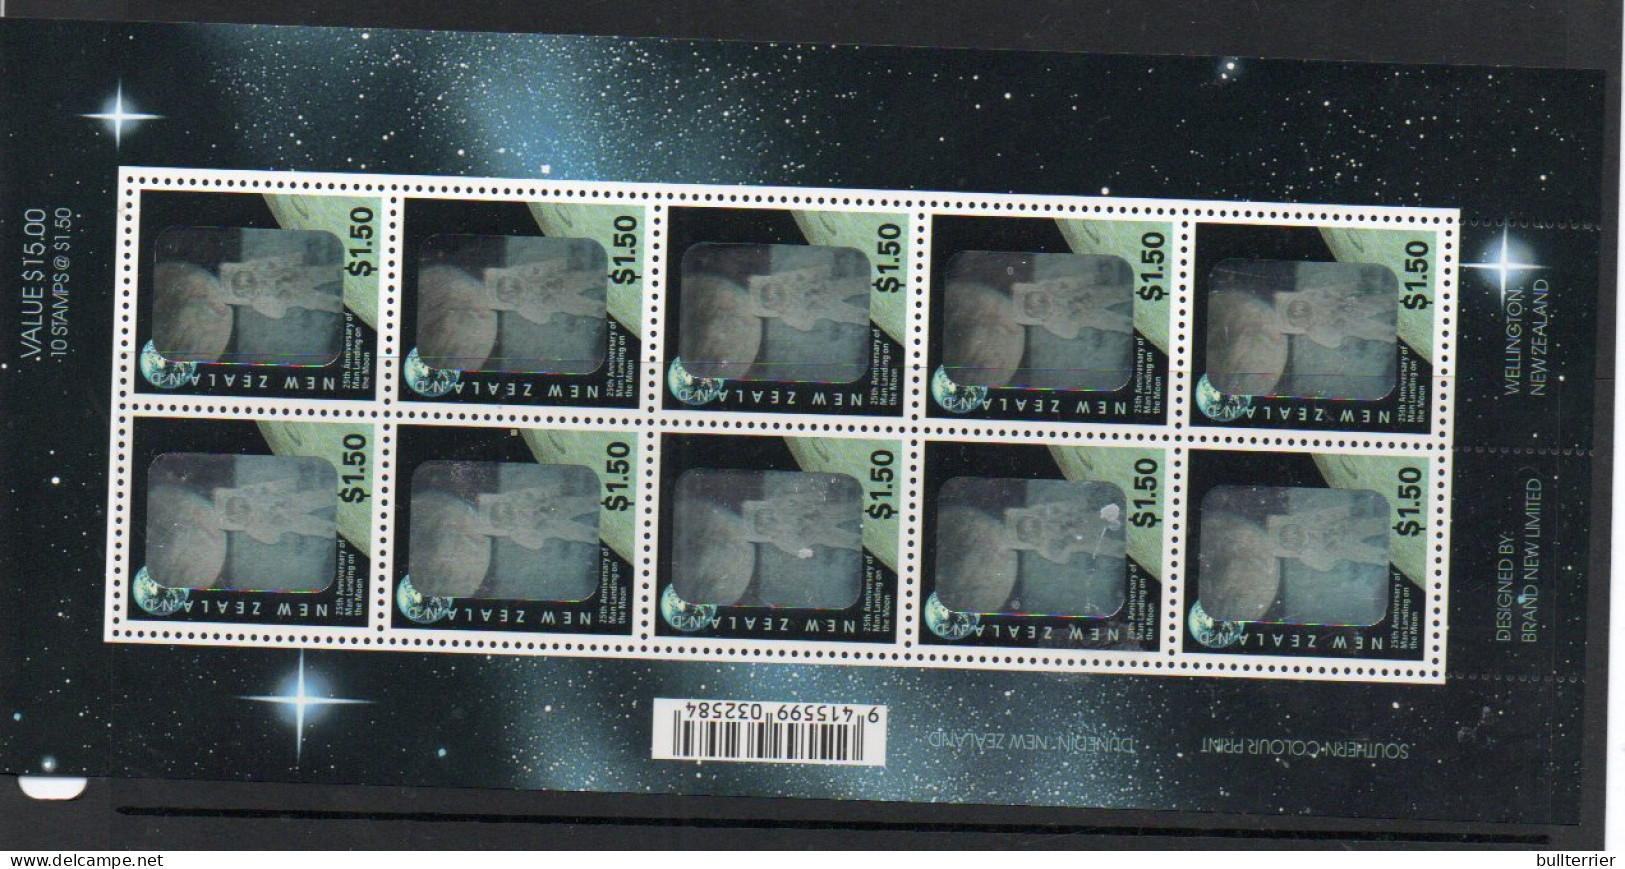 HOLOGRAMS - NEW ZEALAND - 1994- MAN ON MOON £1.50 SHEETLET OF 10  MINT NEVER HINGED, SG CAT £22.50 - Hologramme